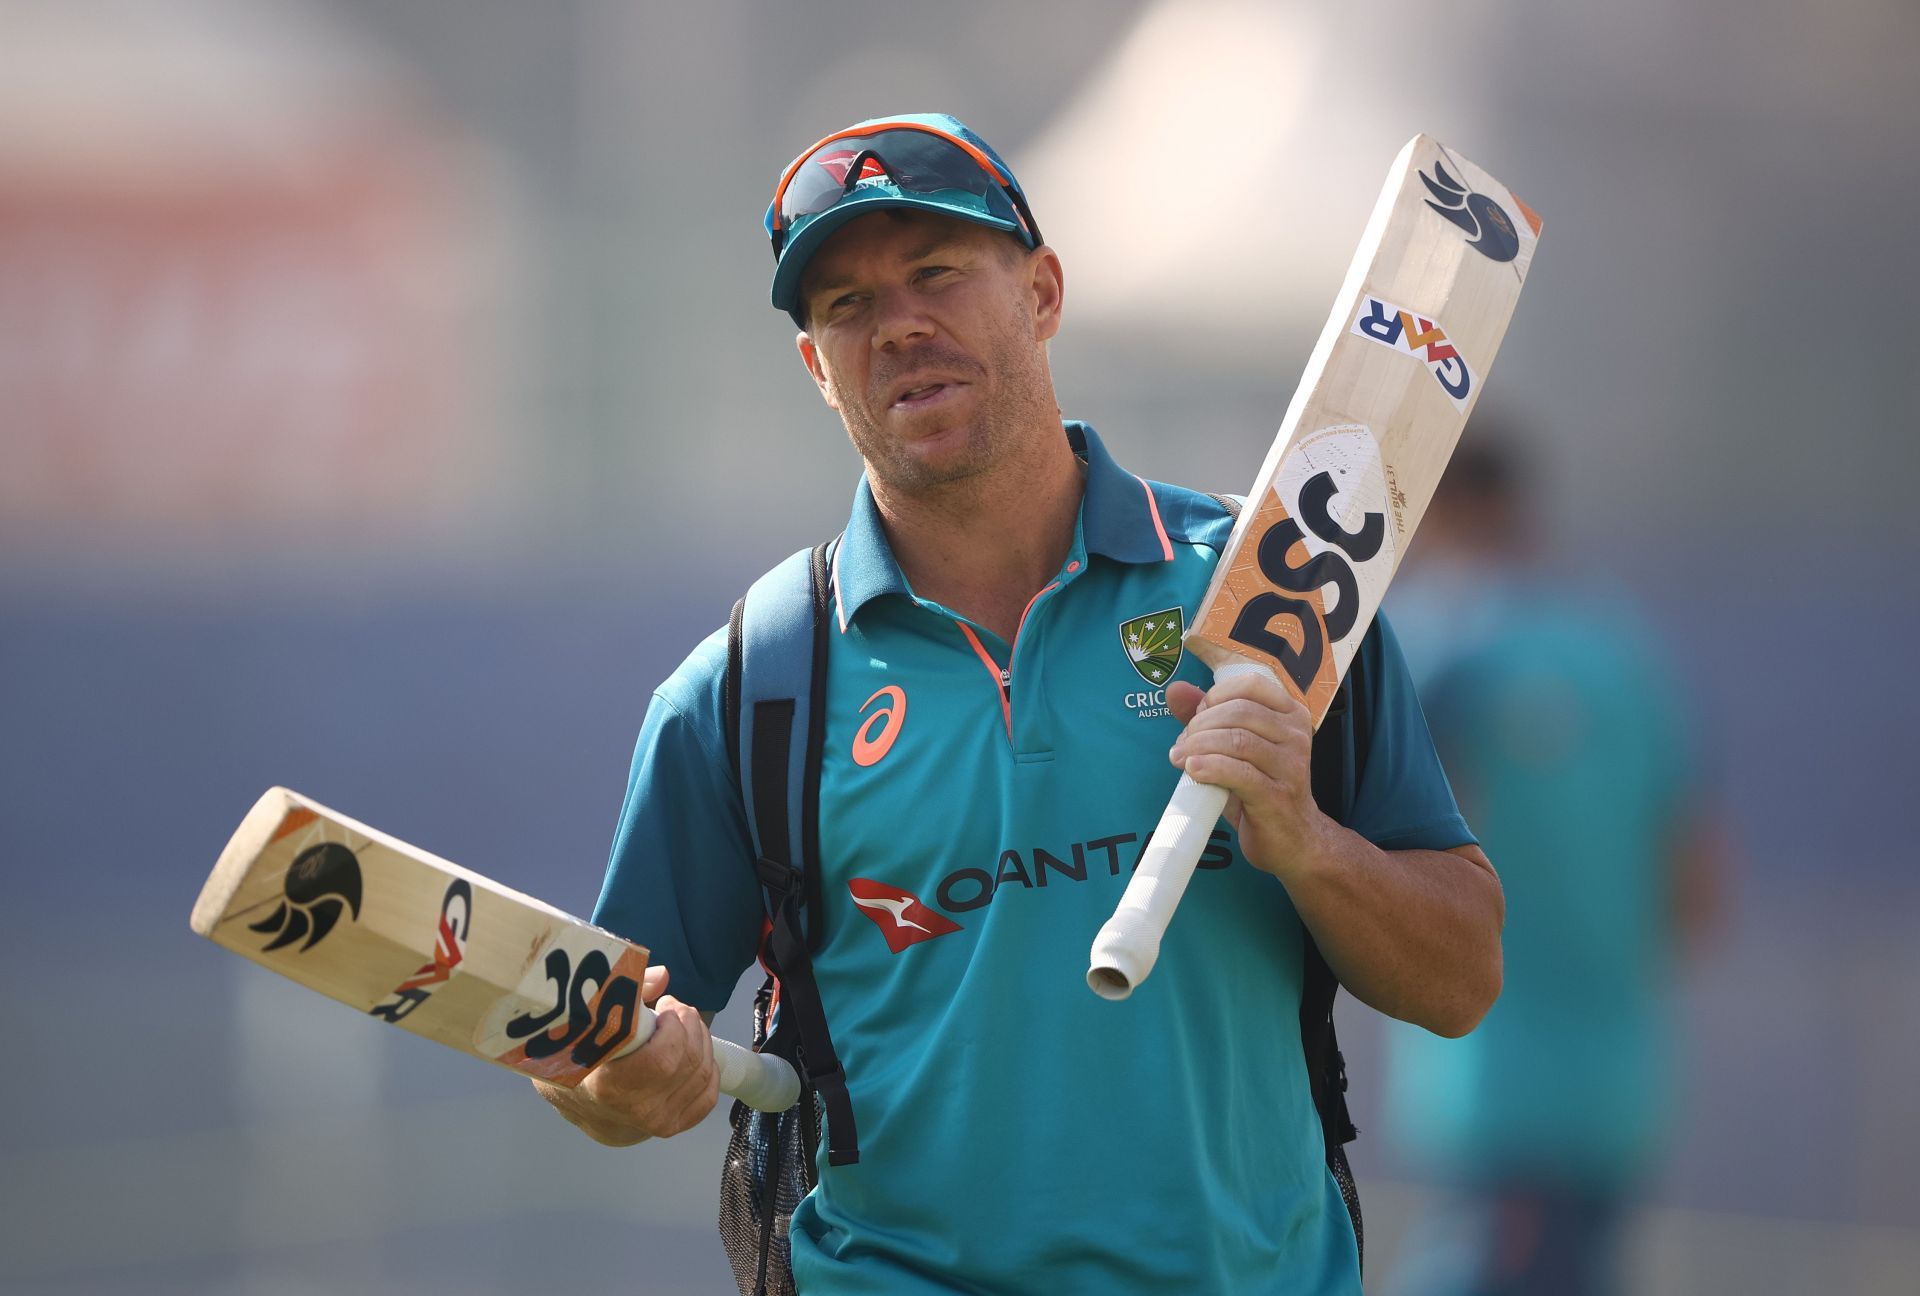 Australia will need David Warner and their other batters to put up a better performance